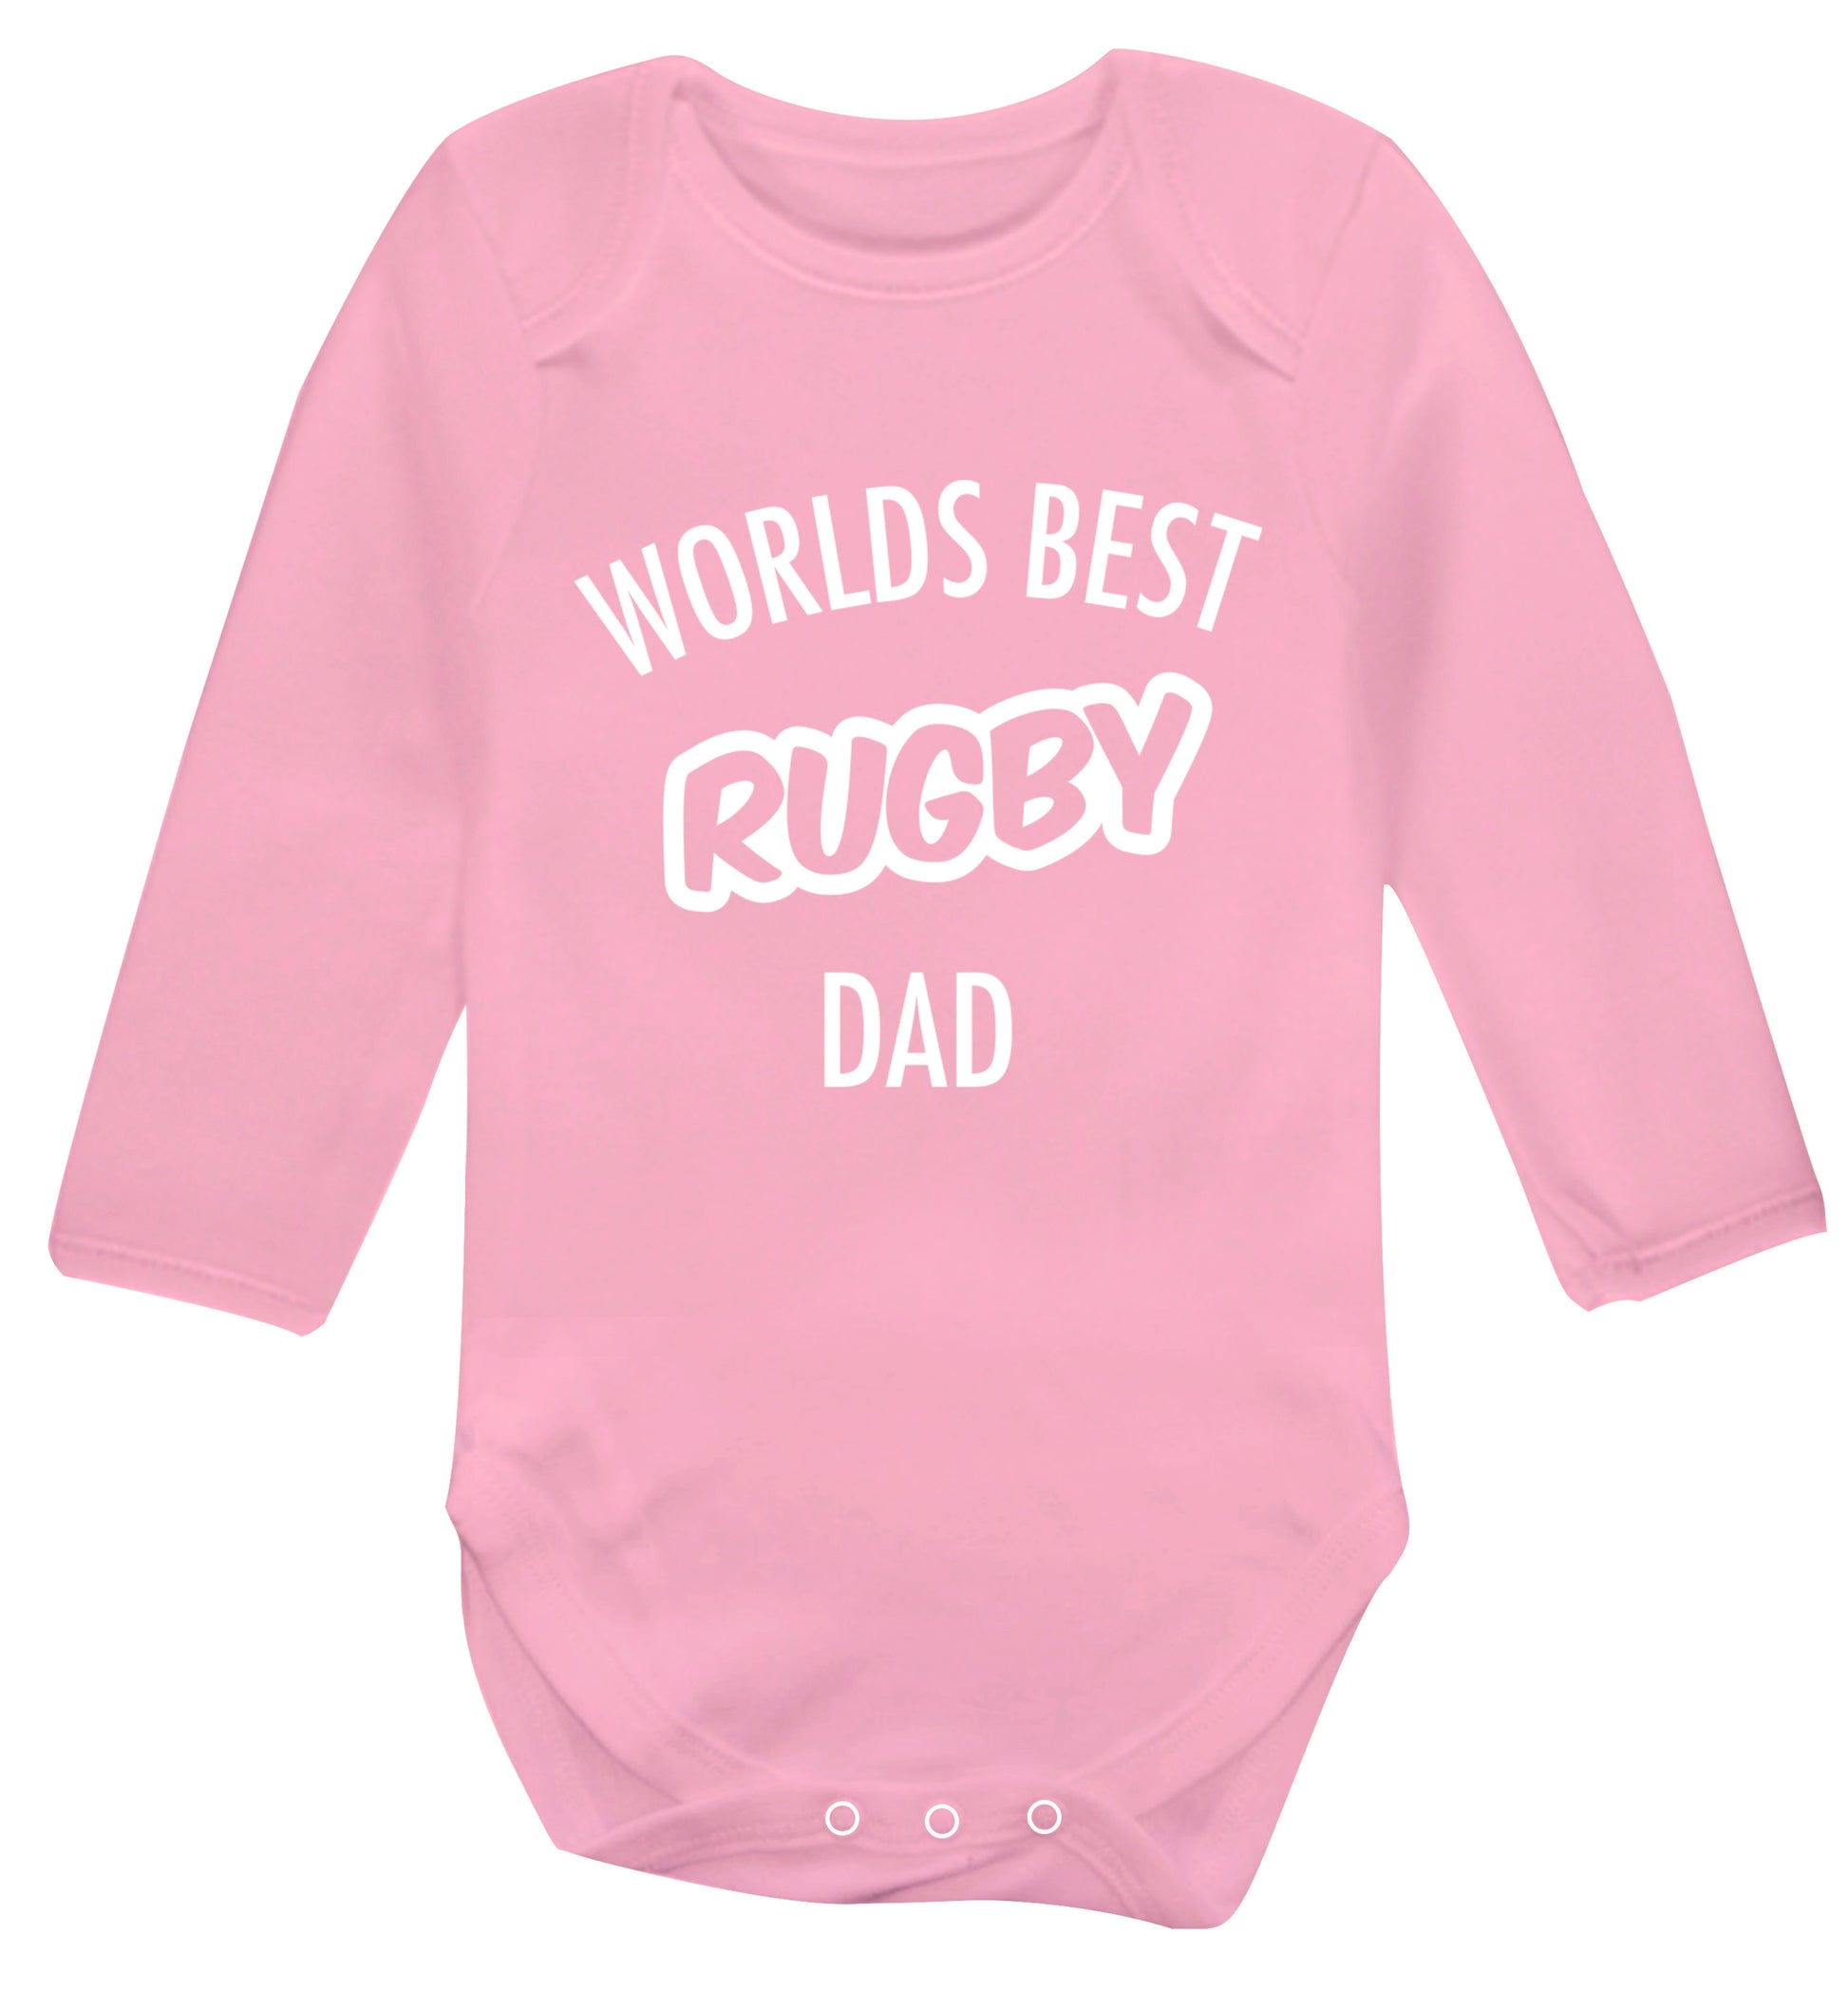 Worlds best rugby dad Baby Vest long sleeved pale pink 6-12 months